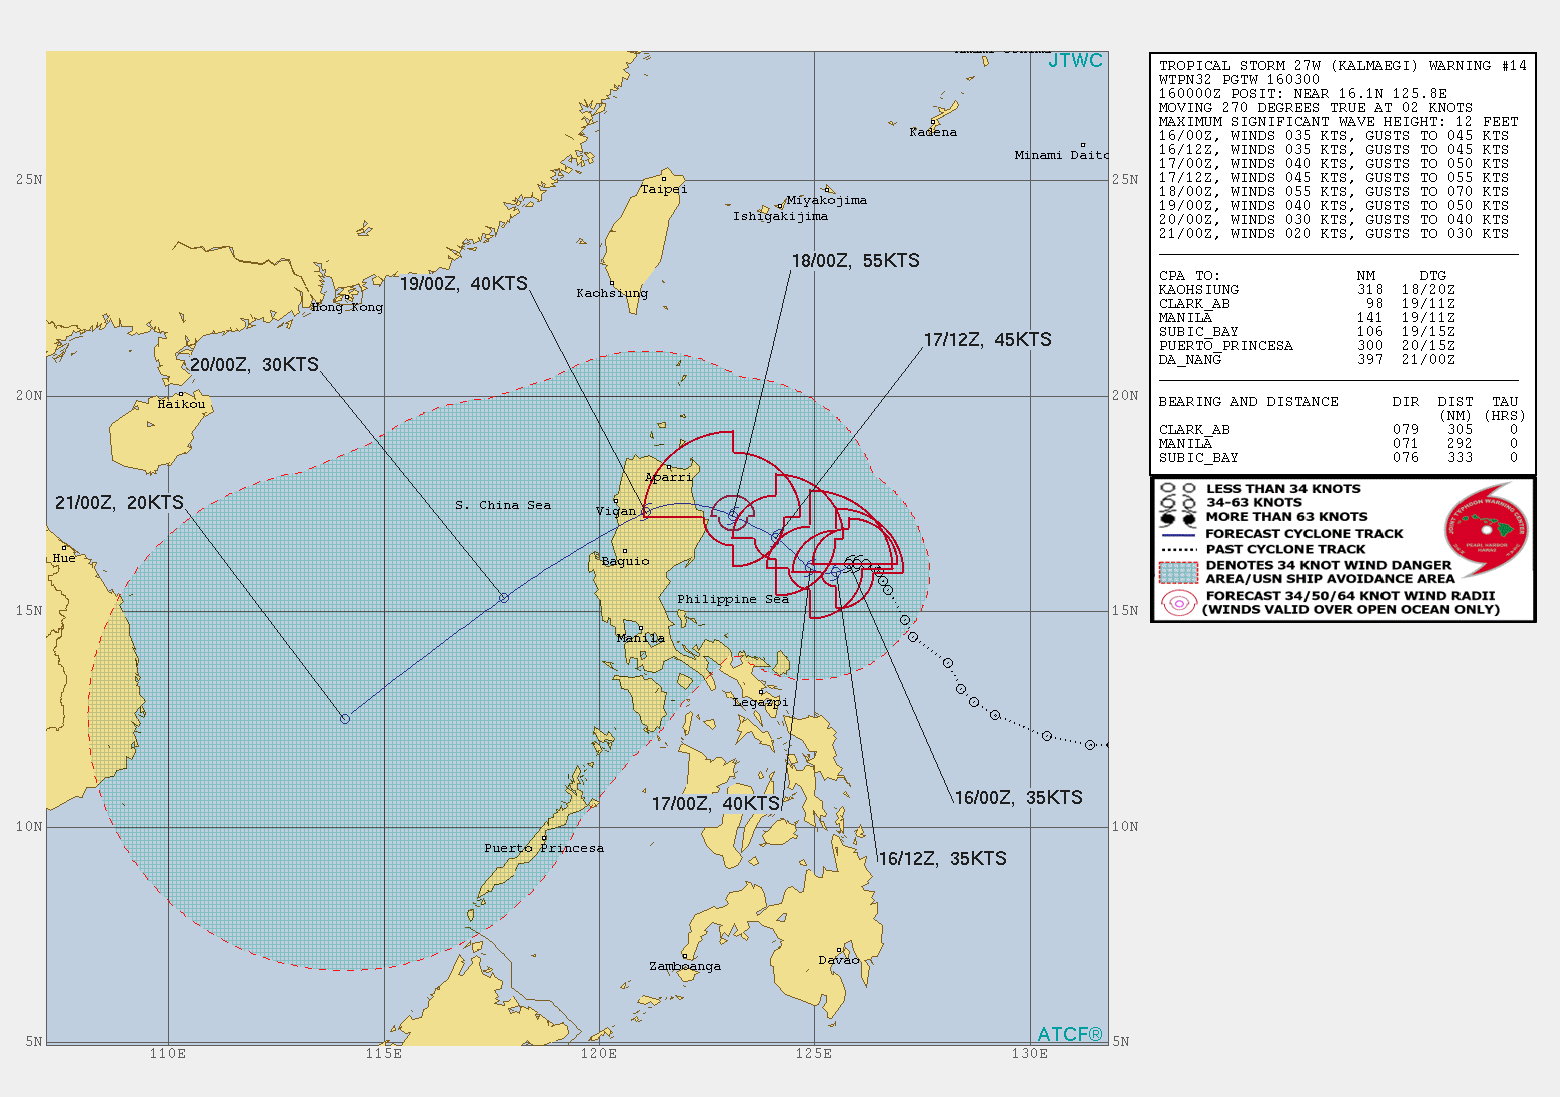 TS 27W: FORECAST TO INTENSIFY NEXT 48H TO PEAK NEAR 55KNOTS WHILE APPROACHING NORTHEAST LUZON